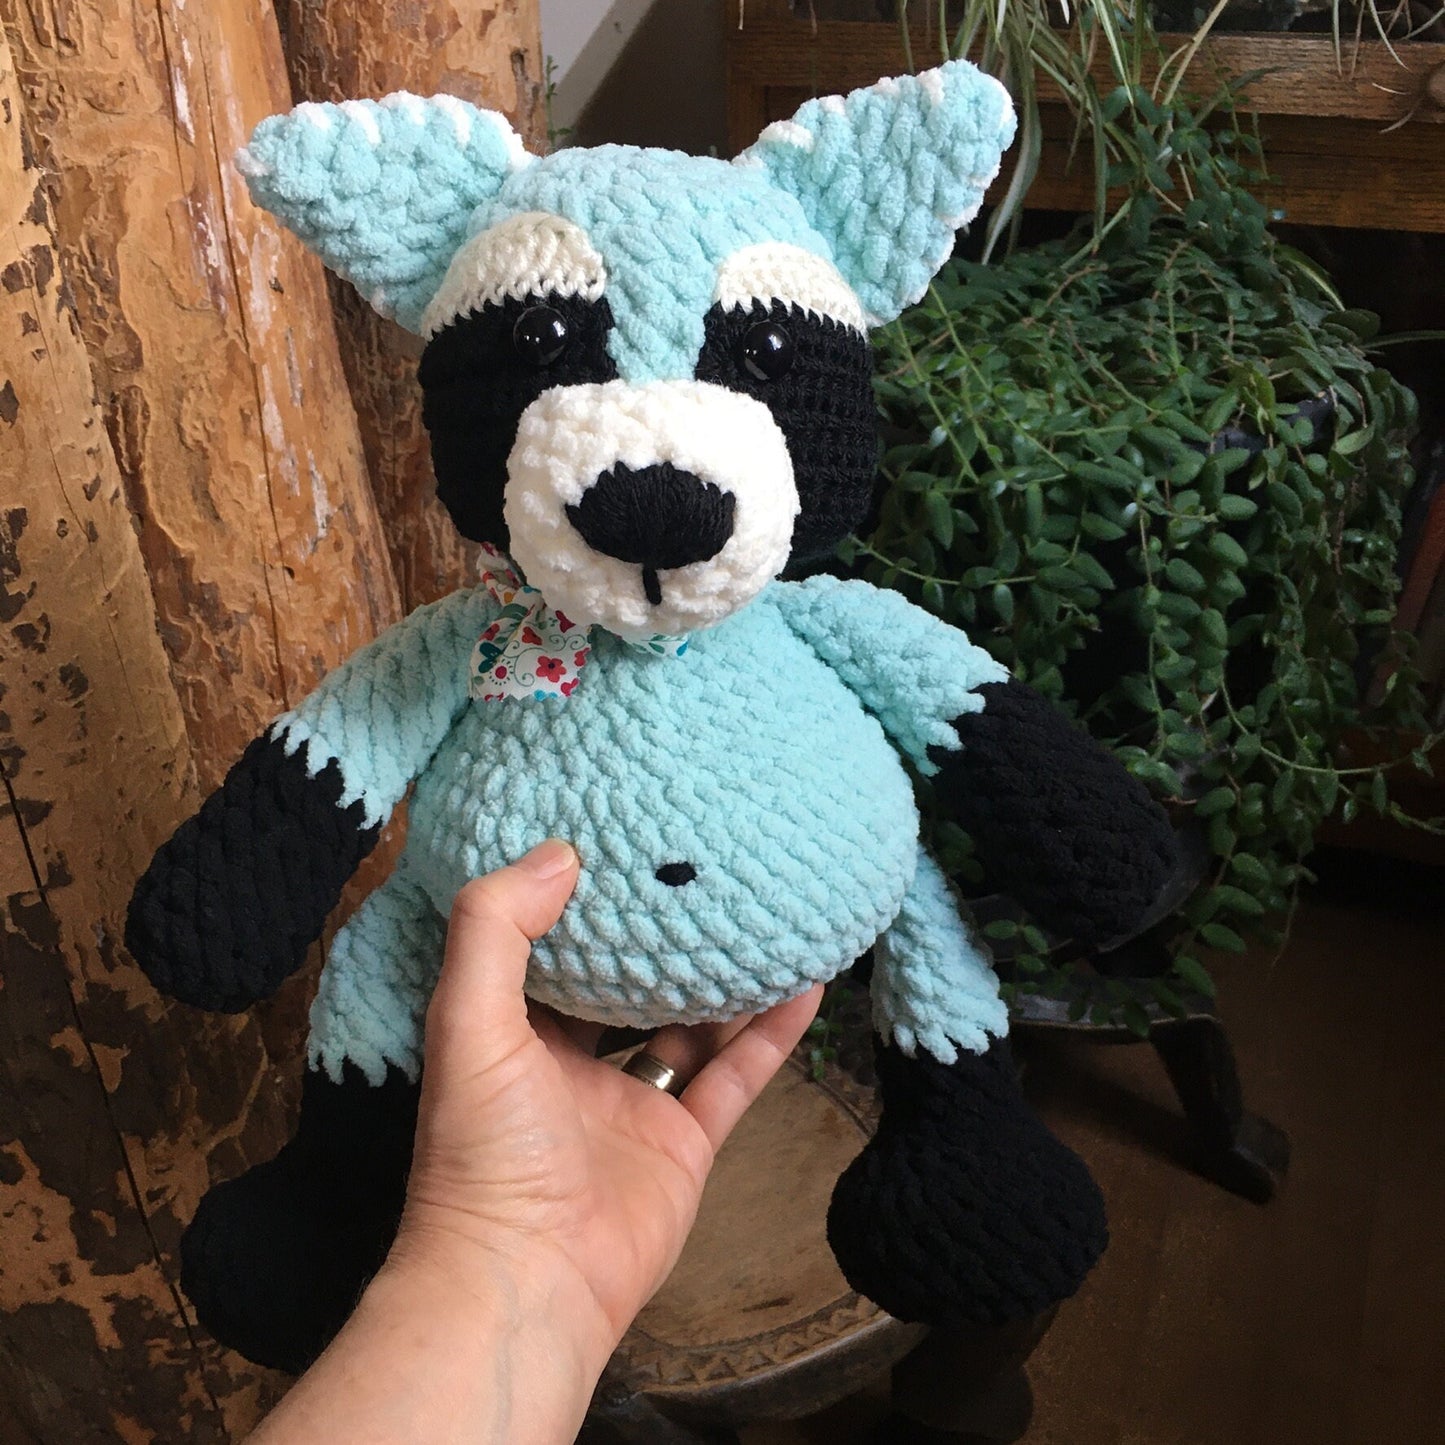 Muffin The RACOON with a BIG BELLY, turquoise and black, amigurumi friend of the boreal forest, can be personalized in born plushie